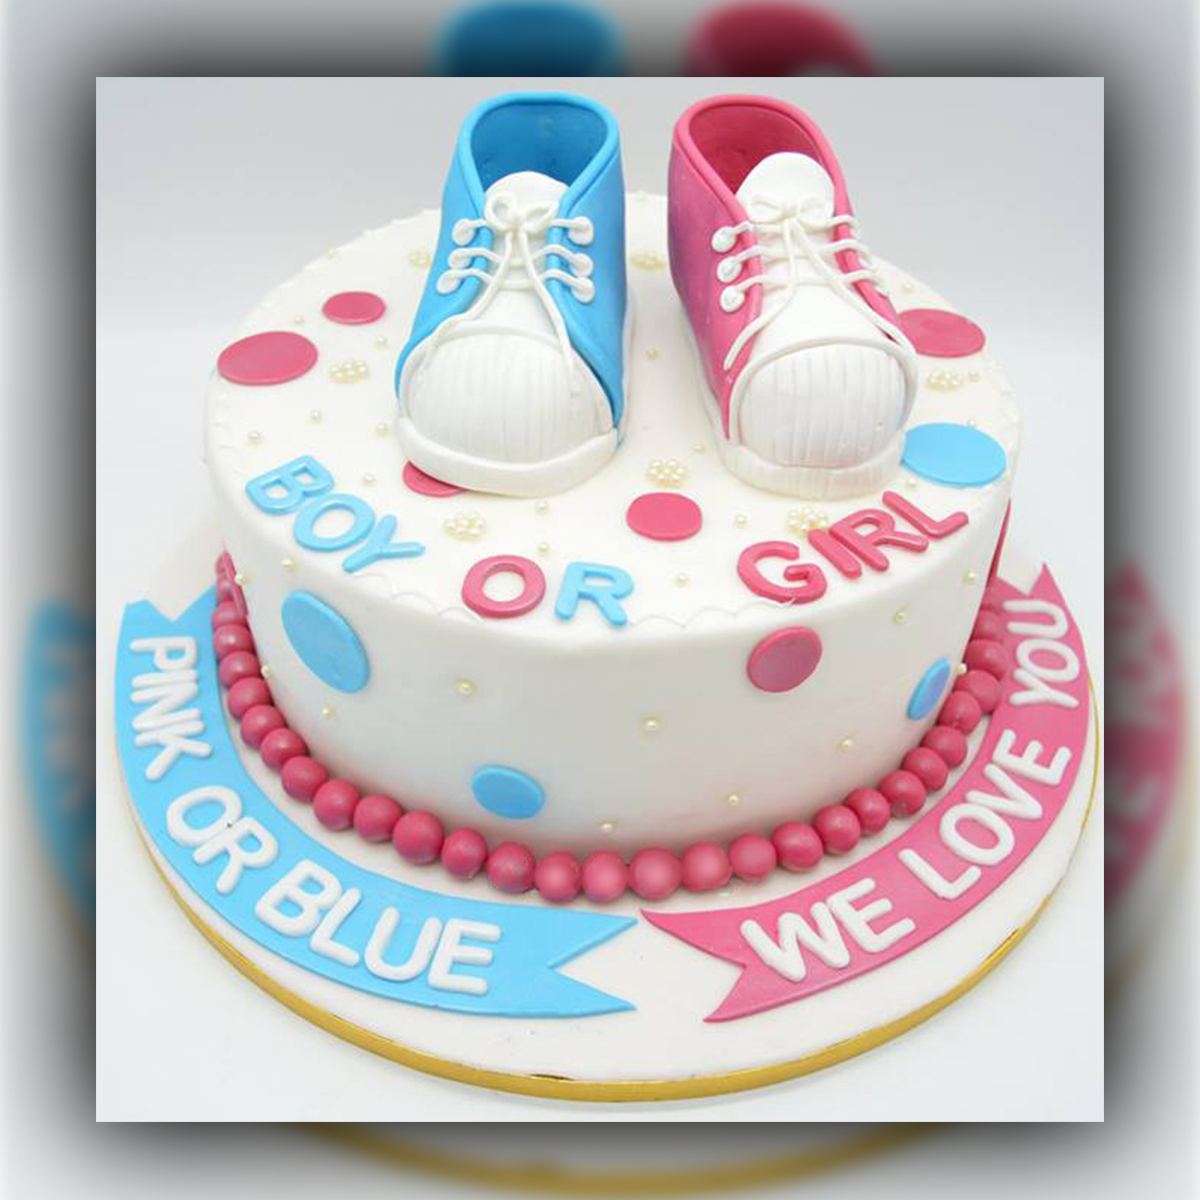 New Born Baby Boy - CakeCentral.com